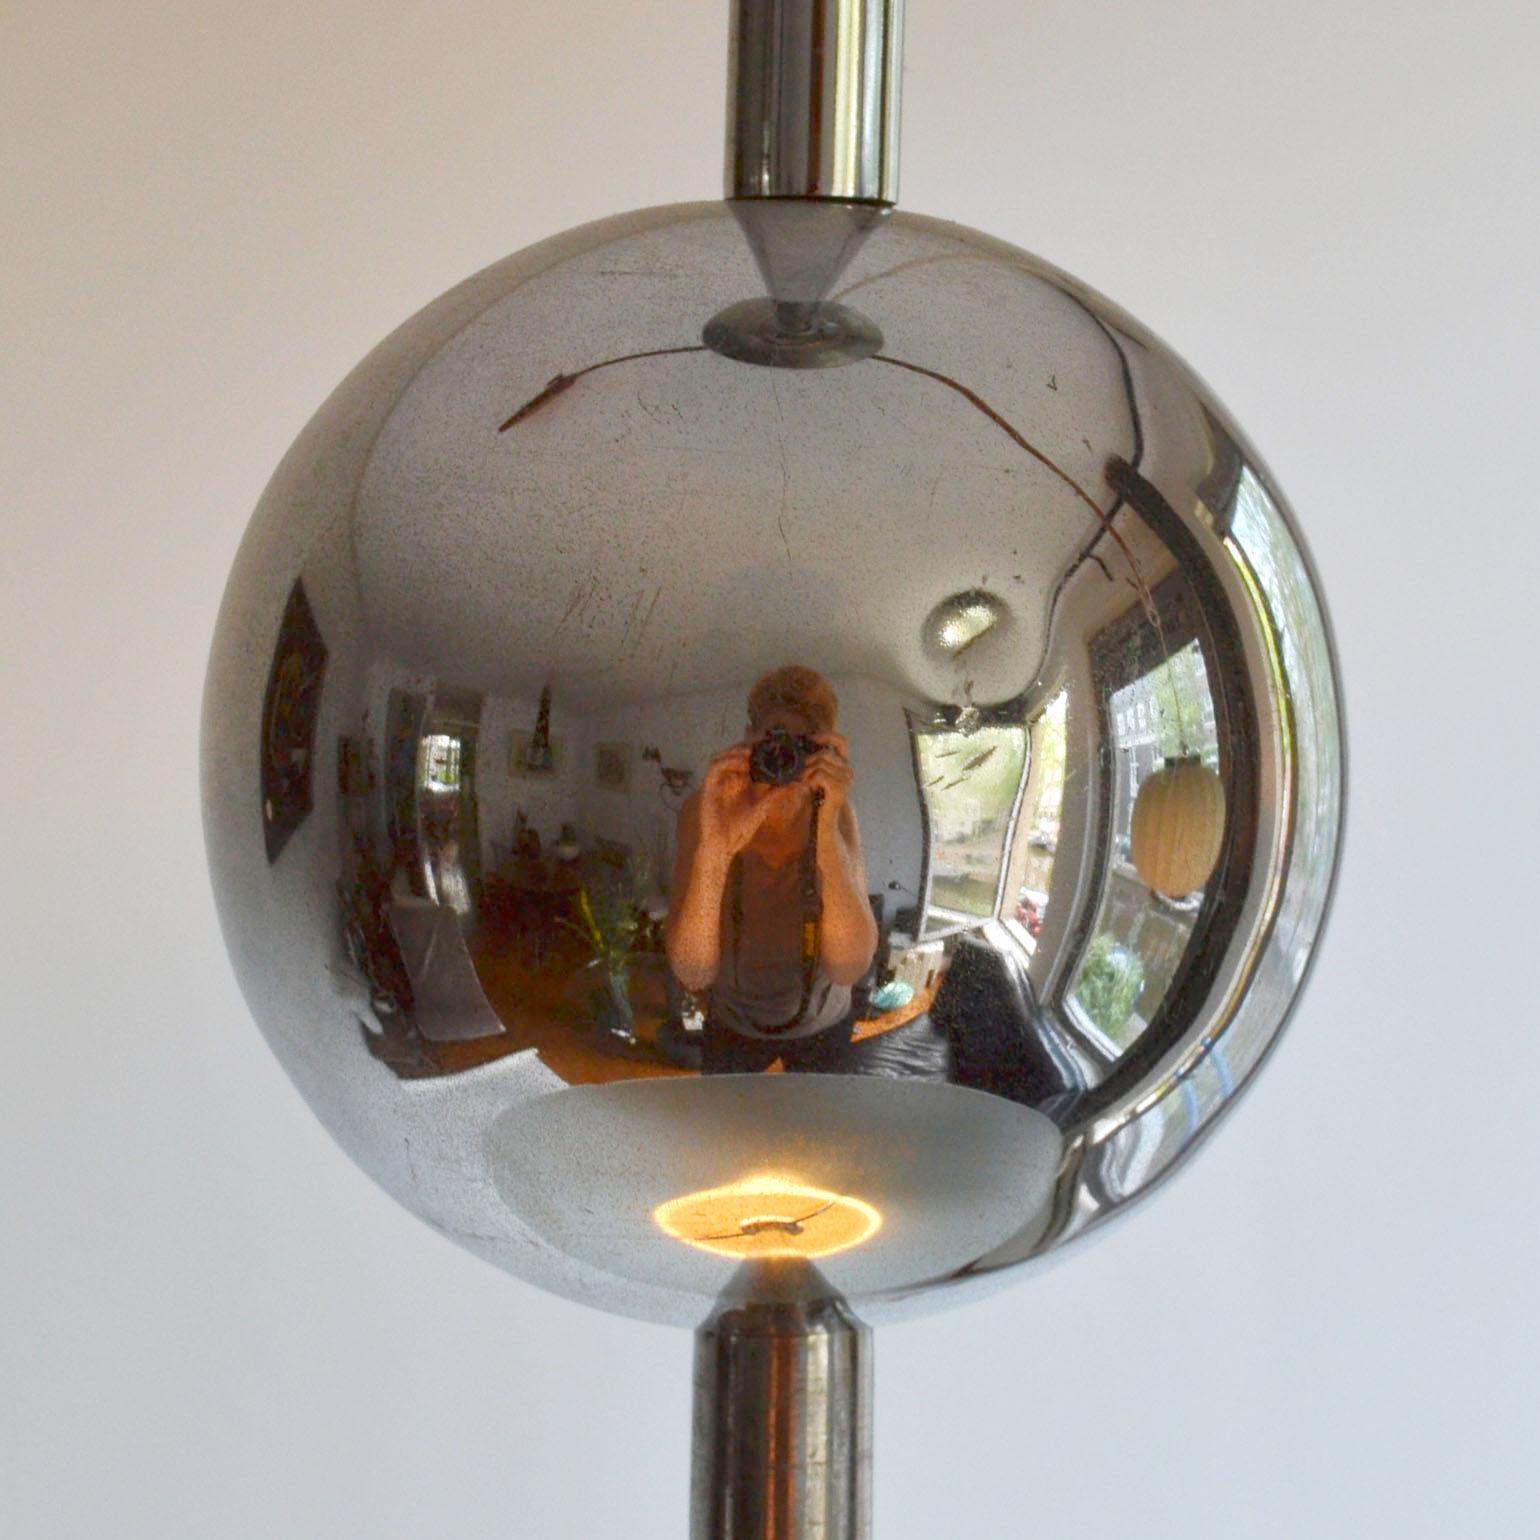 Modernist Chrome and Glass Pendant in the Style of Gispen 1930s For Sale 3